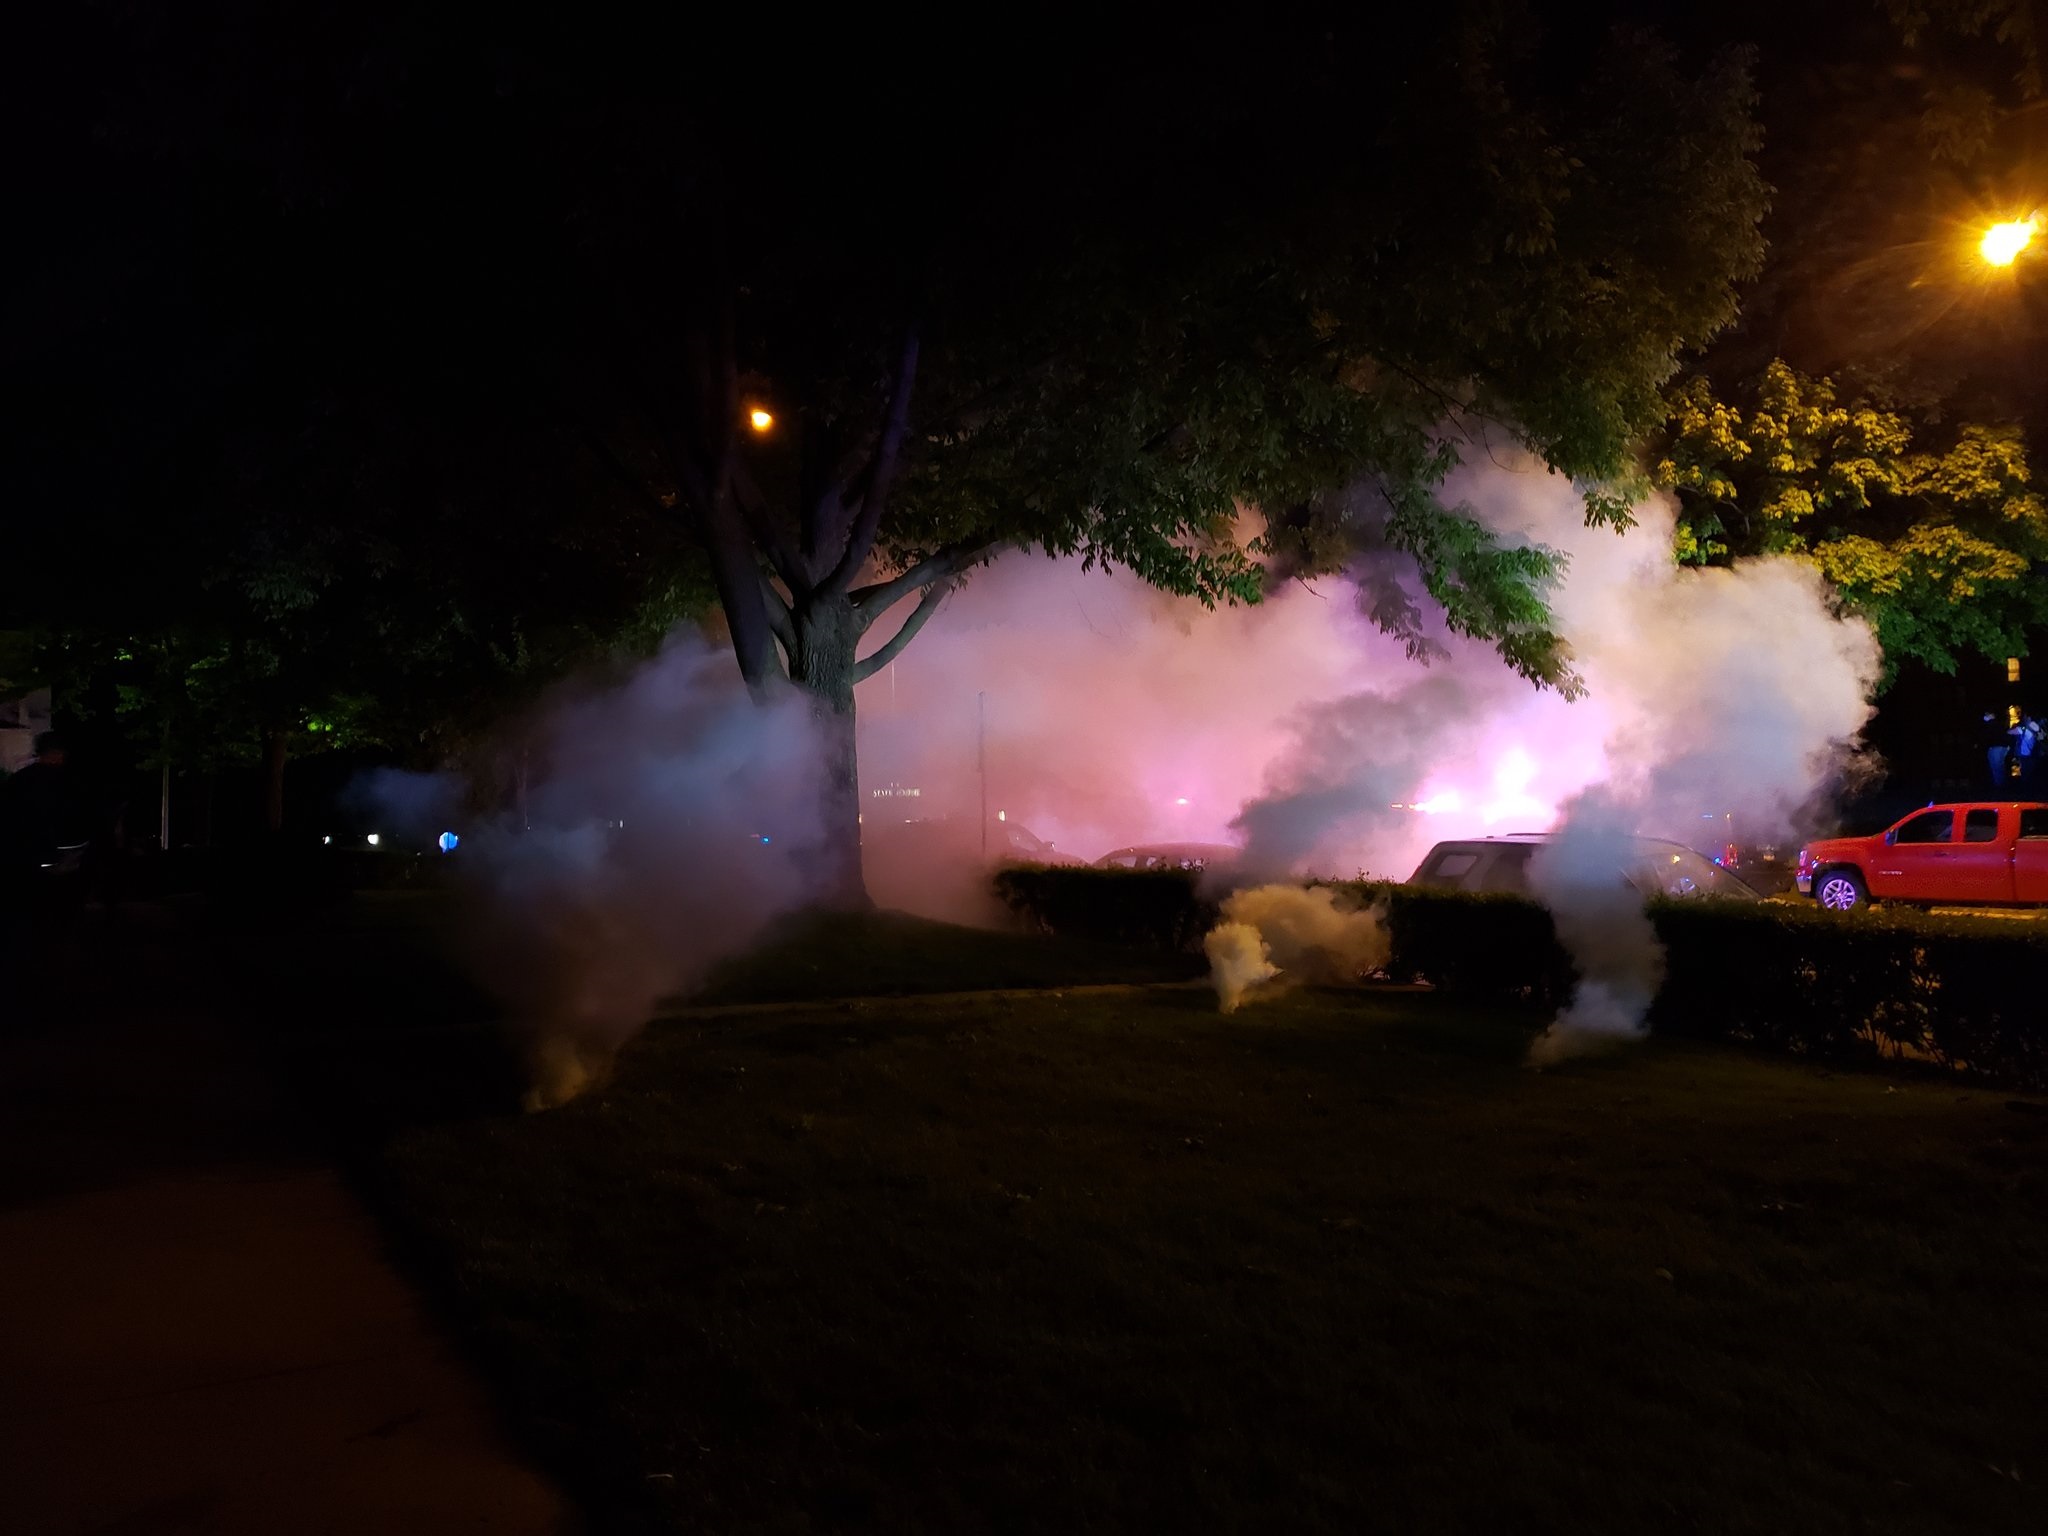 Police in Madison deployed tear gas Sunday night after clashes with protesters